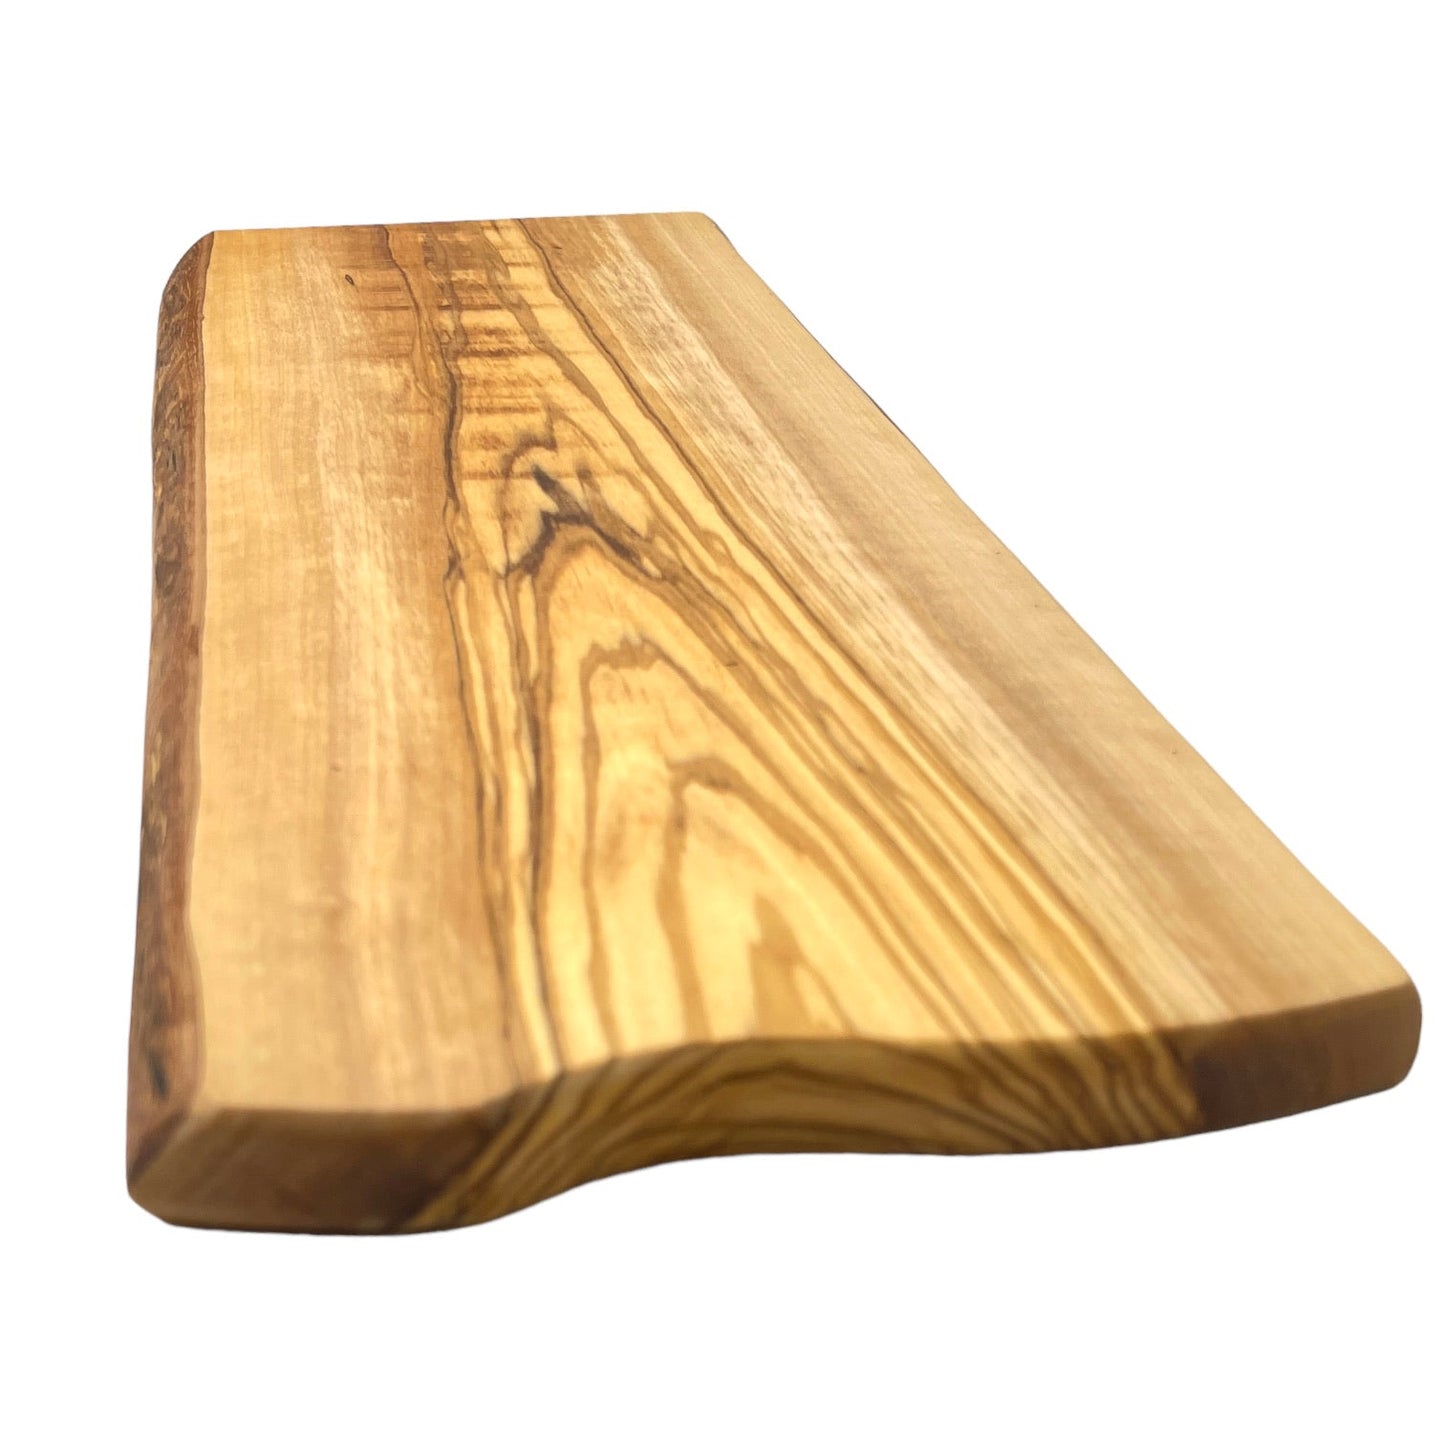 Live-edge Rustic Olive Wood - Handmade Charcuterie Boards - RTS tray edge detail view 2